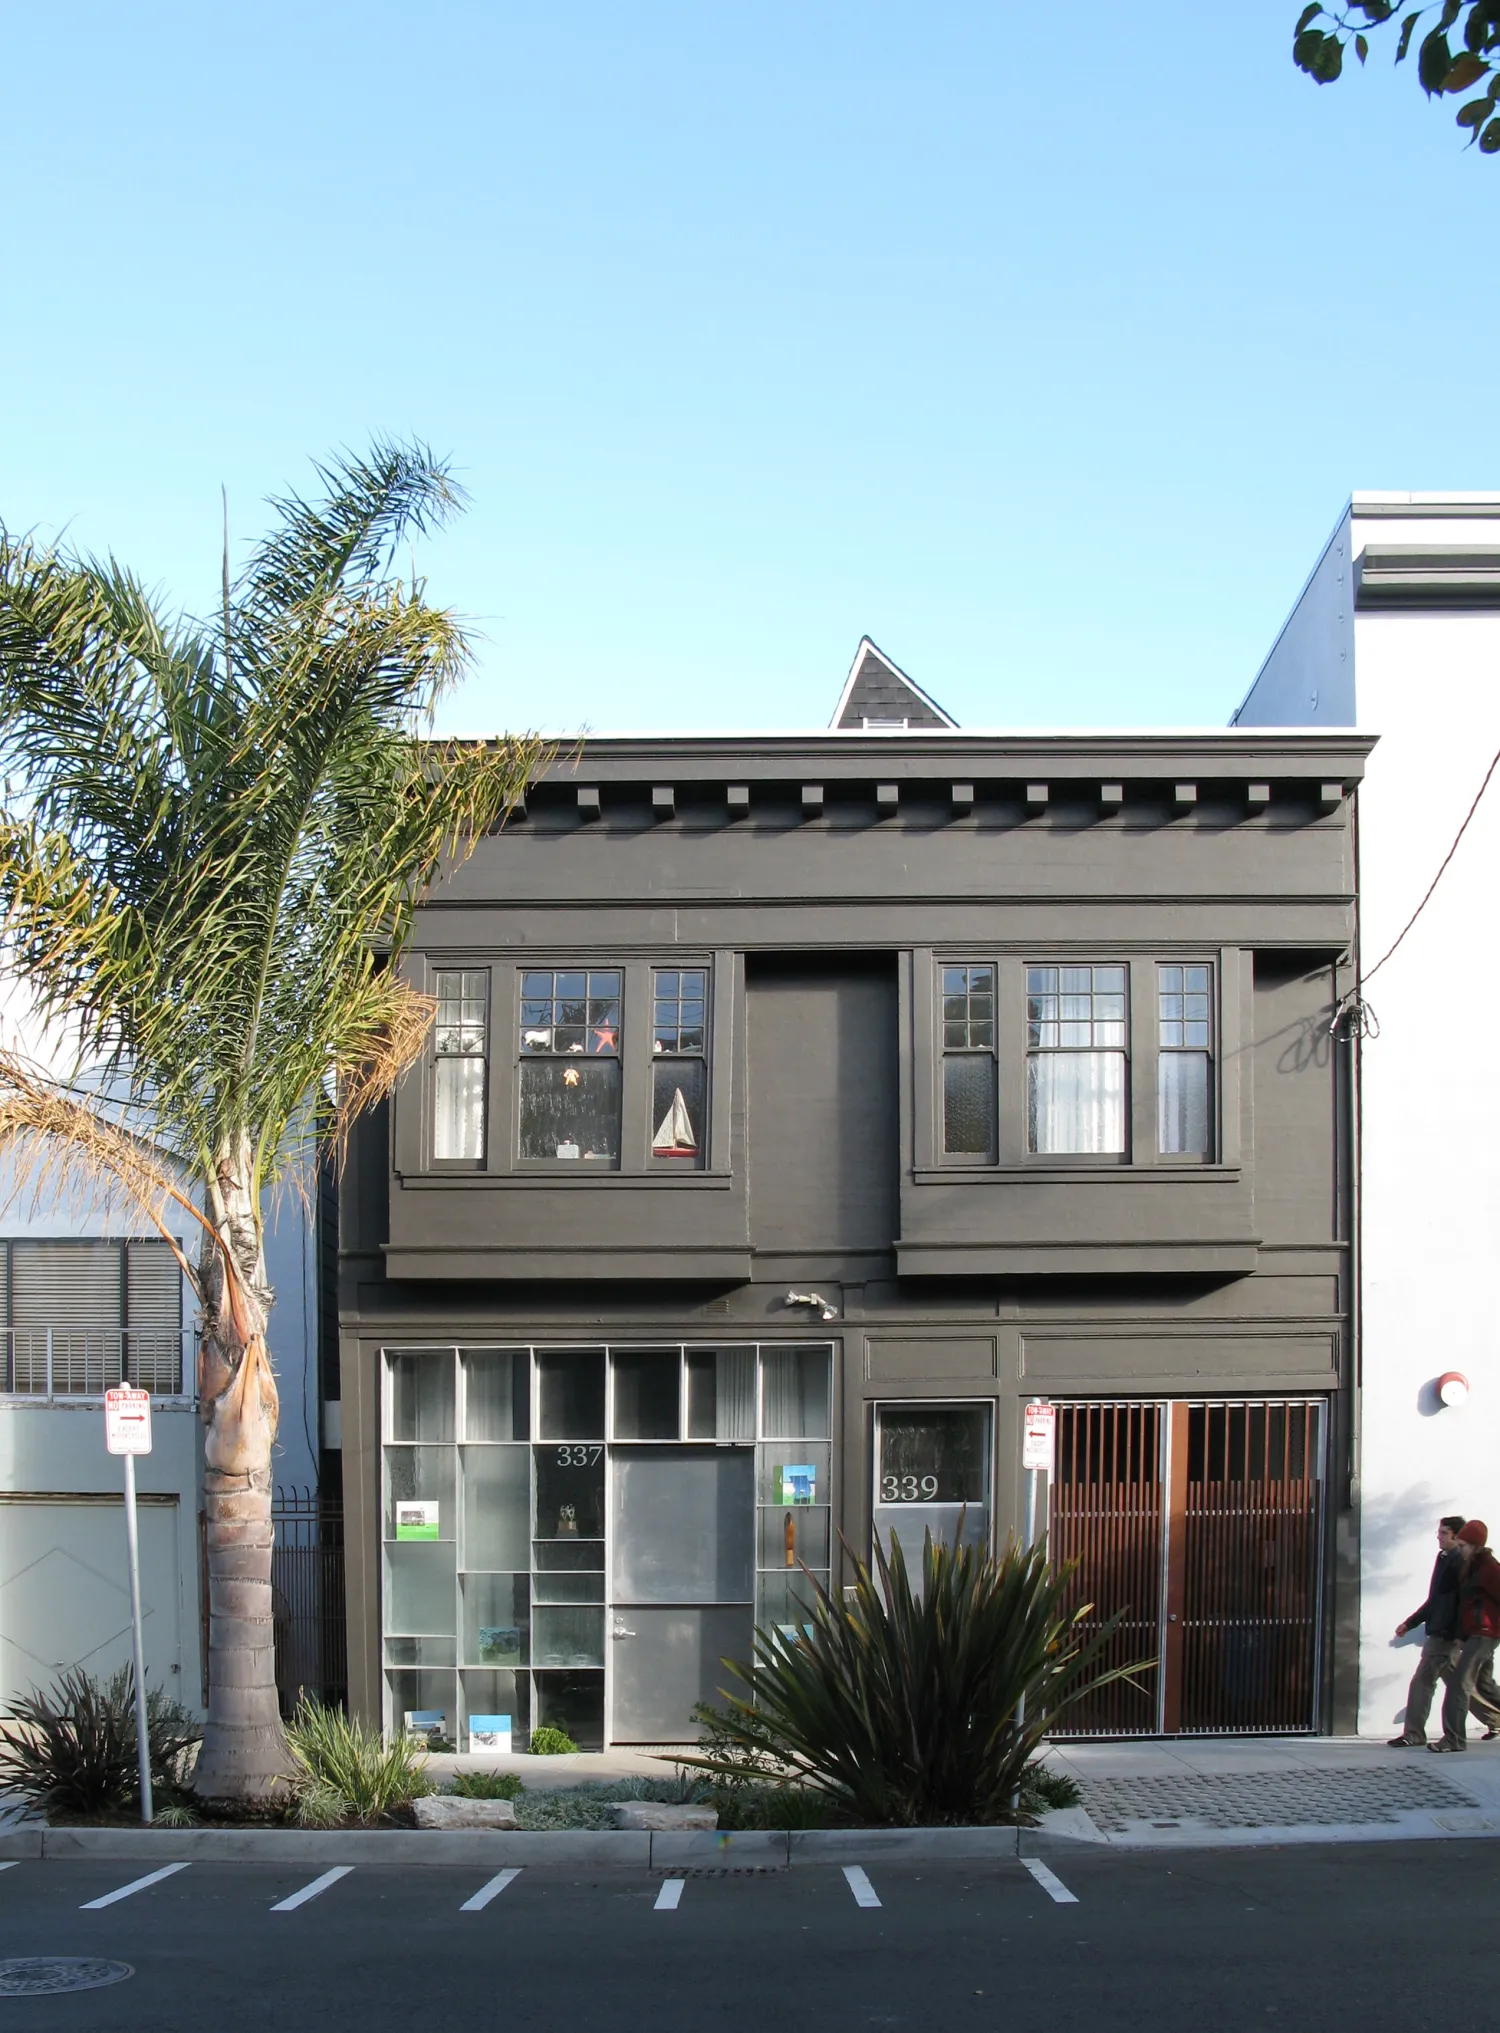 Exterior street view of Shotwell Design Lab in San Francisco.